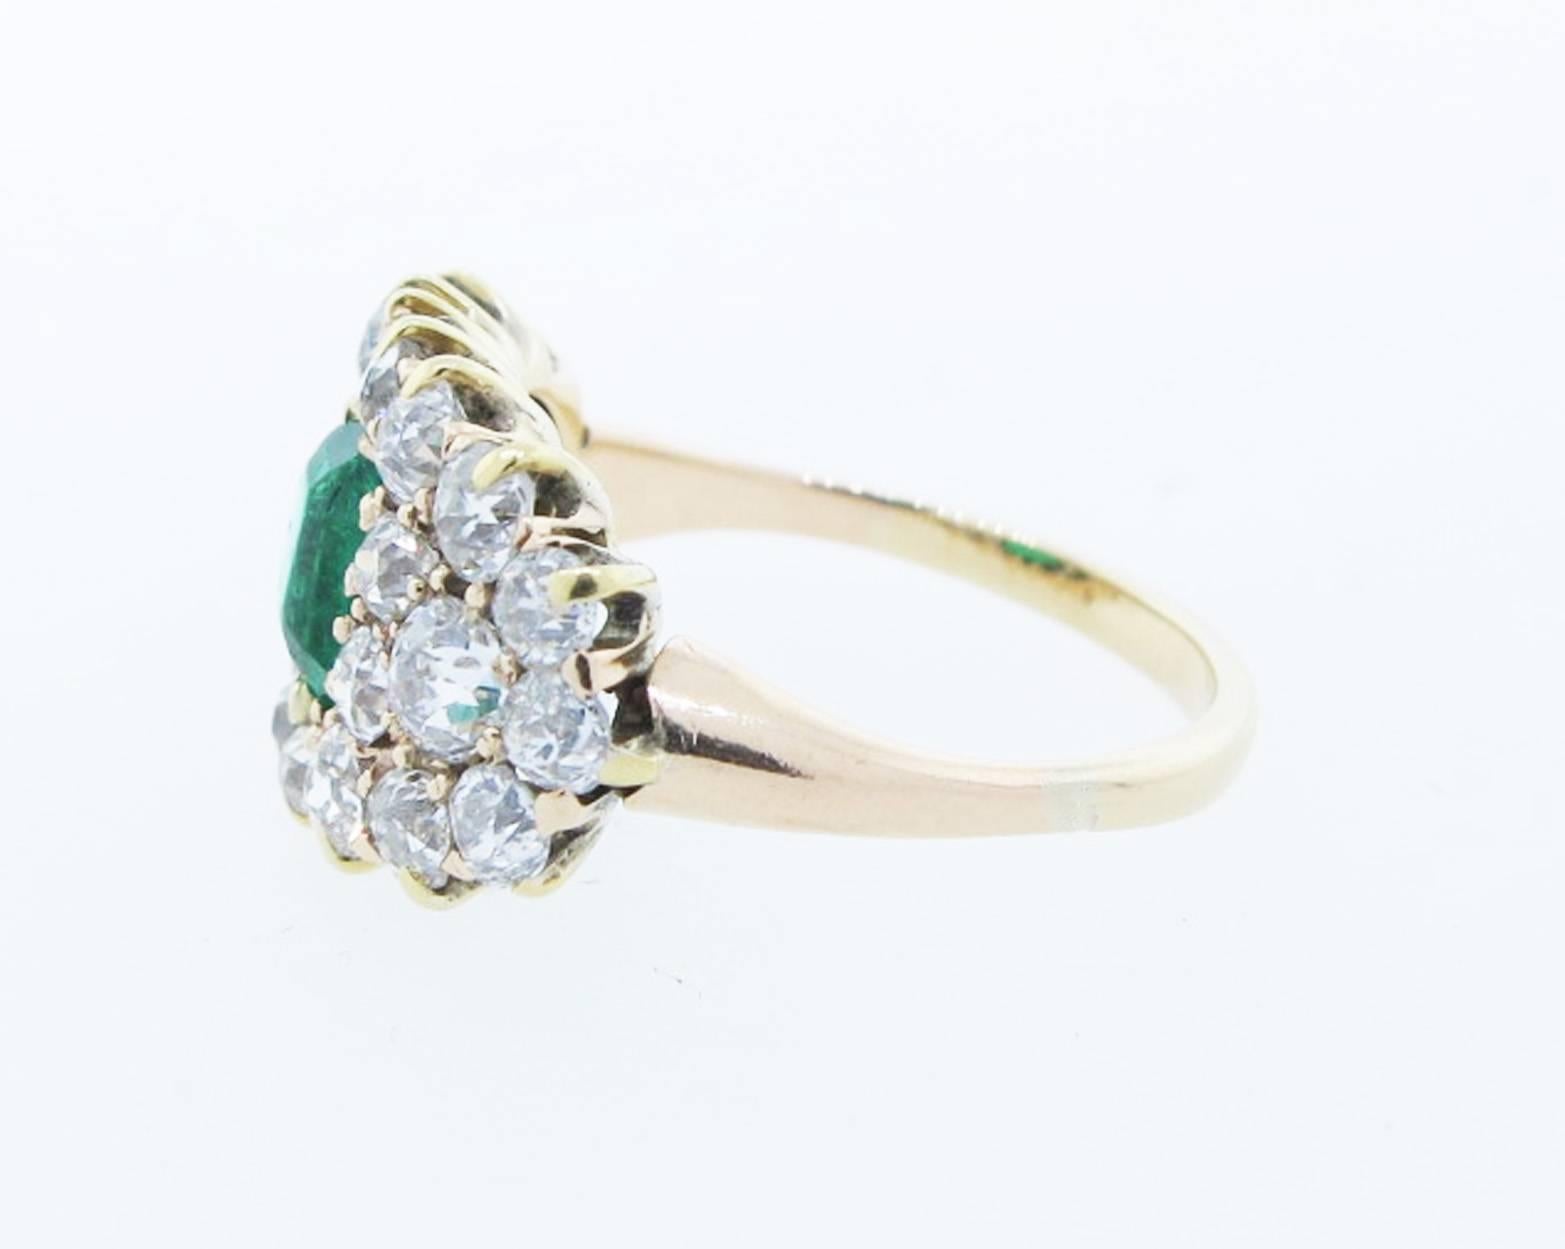 Handmade 14kt. yellow gold band style ring circa 1900. The center is set with an emerald cut faceted natural emerald of beautiful color weighing 1.0cts. The wrap around mount is prong set with 24 old mine cut diamonds totaling approx 1.2cts. grading